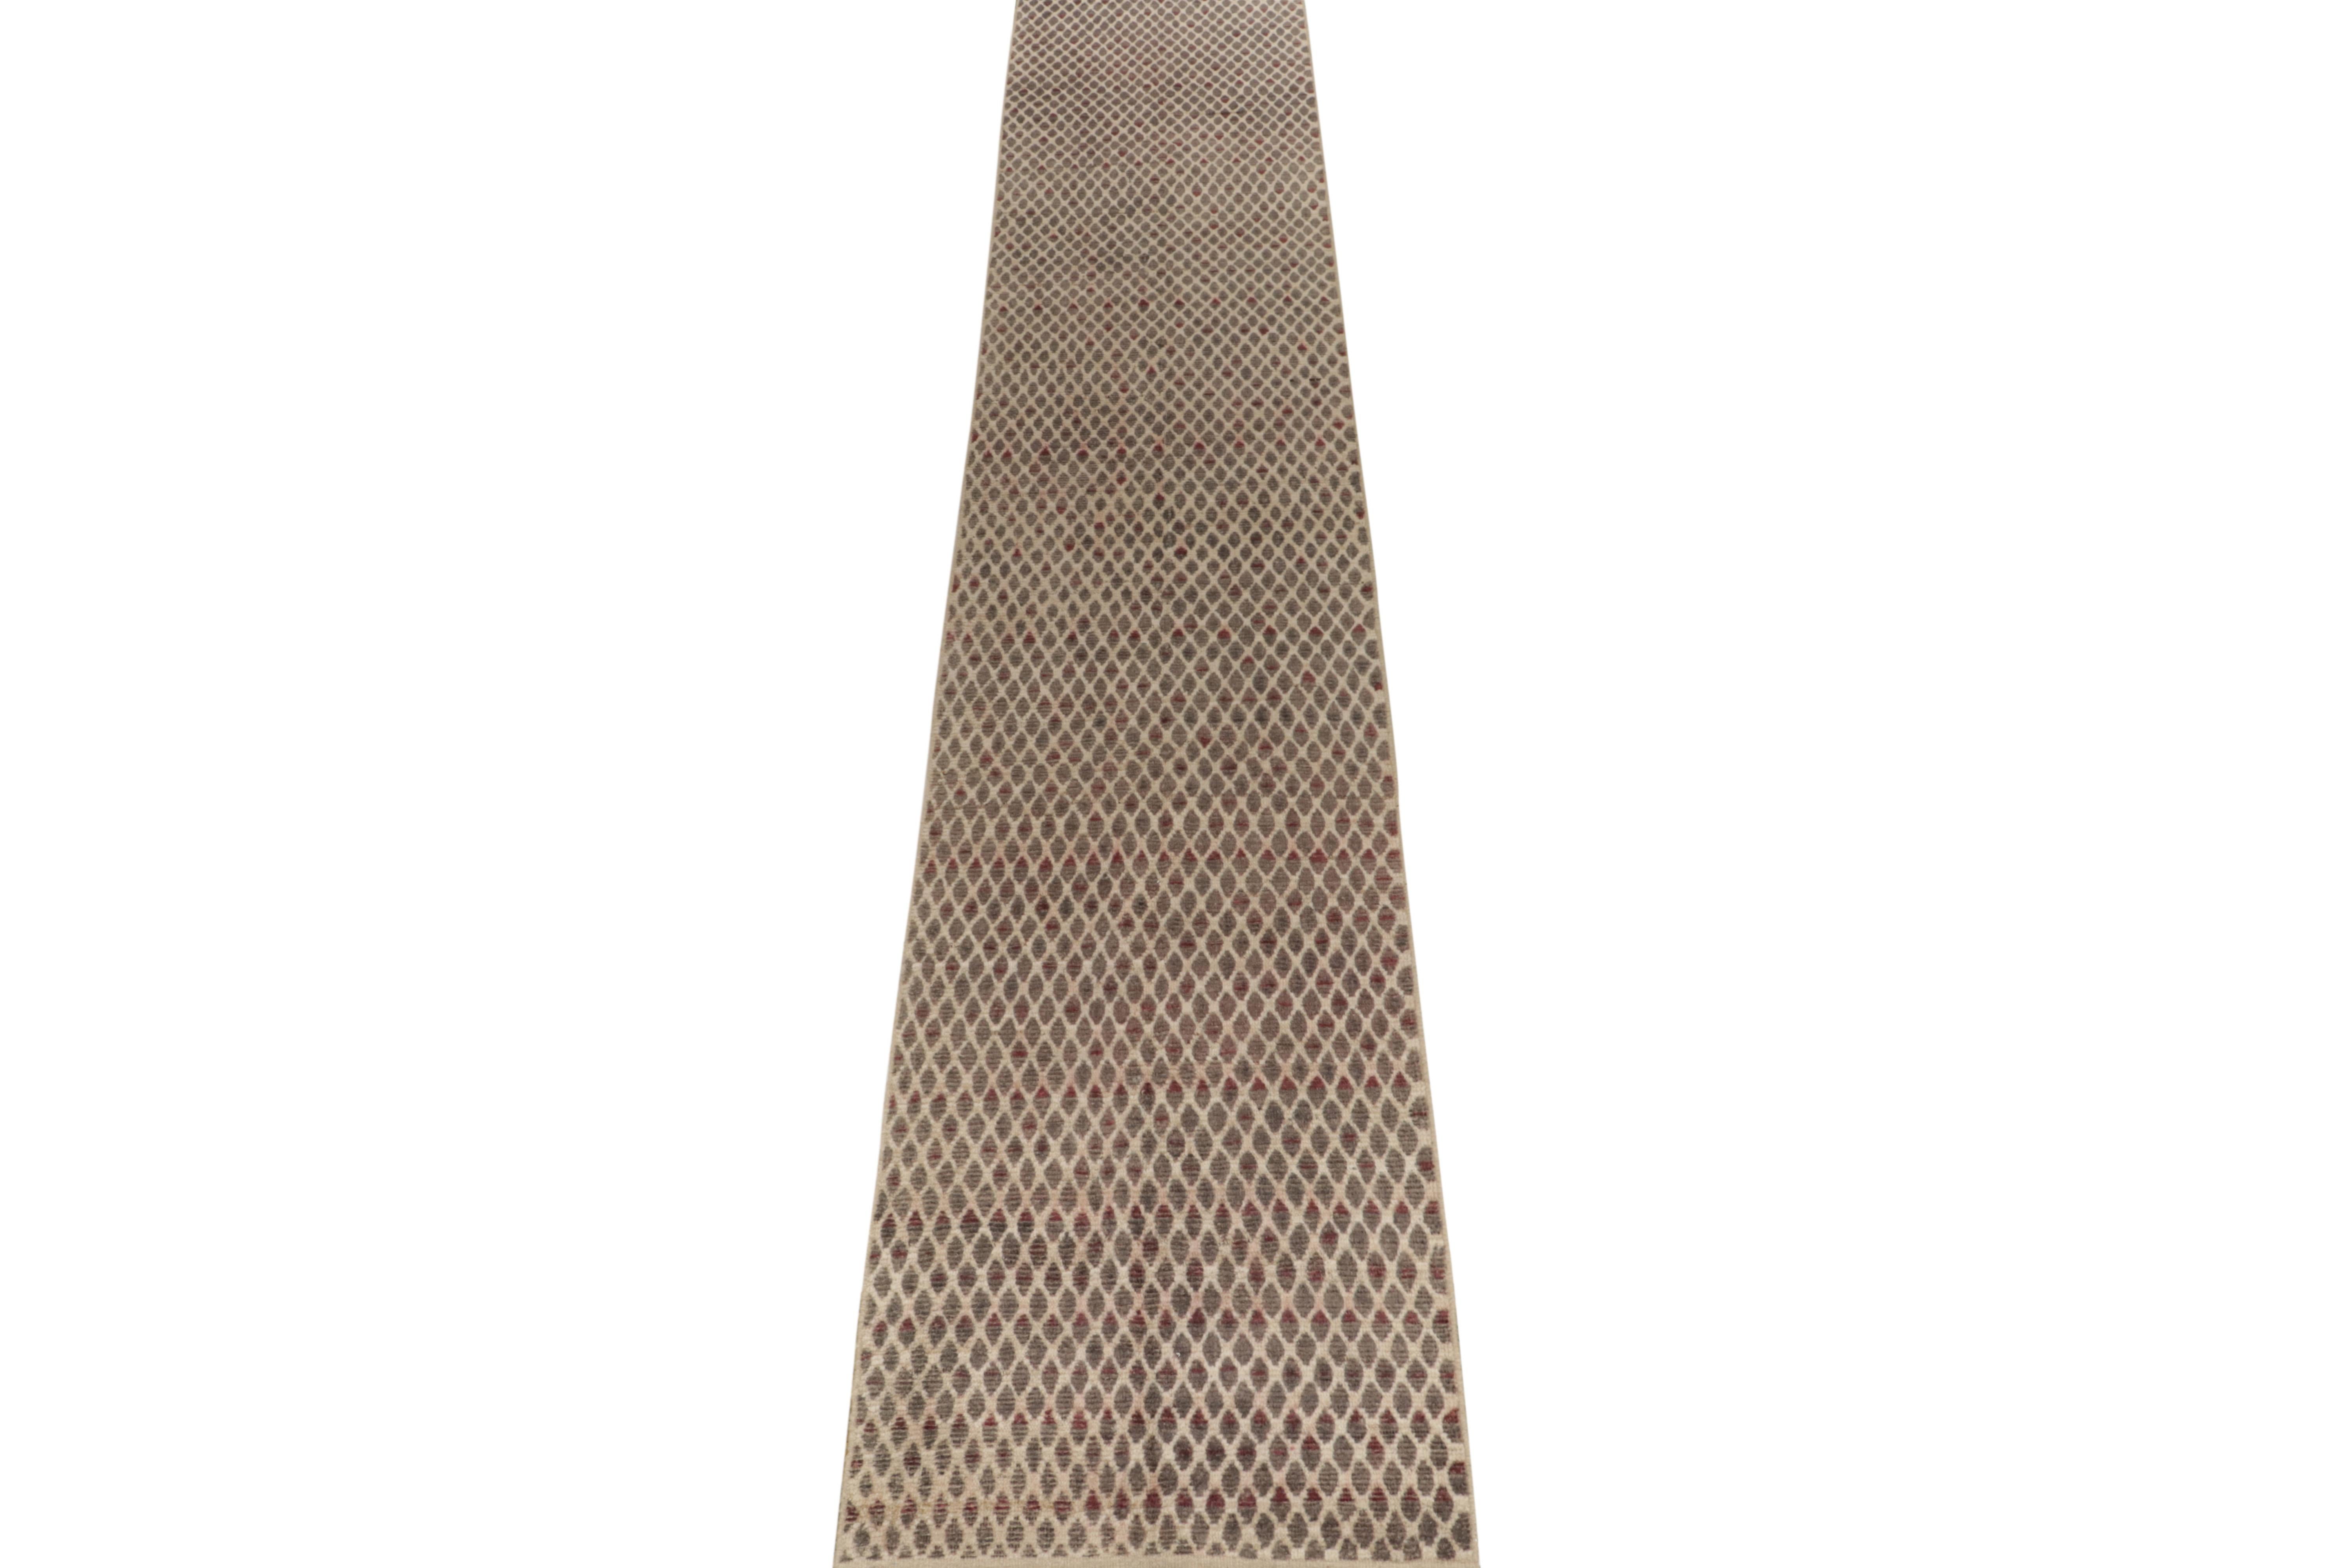 Joining our modern selections, a 3 x 19 hand-knotted wool runner embracing Moroccan aesthetics. Bearing a textural excellence, the mildly ribbed piece features a mesh like geometric pattern in beige-brown, light gray with red punctuations for a pop